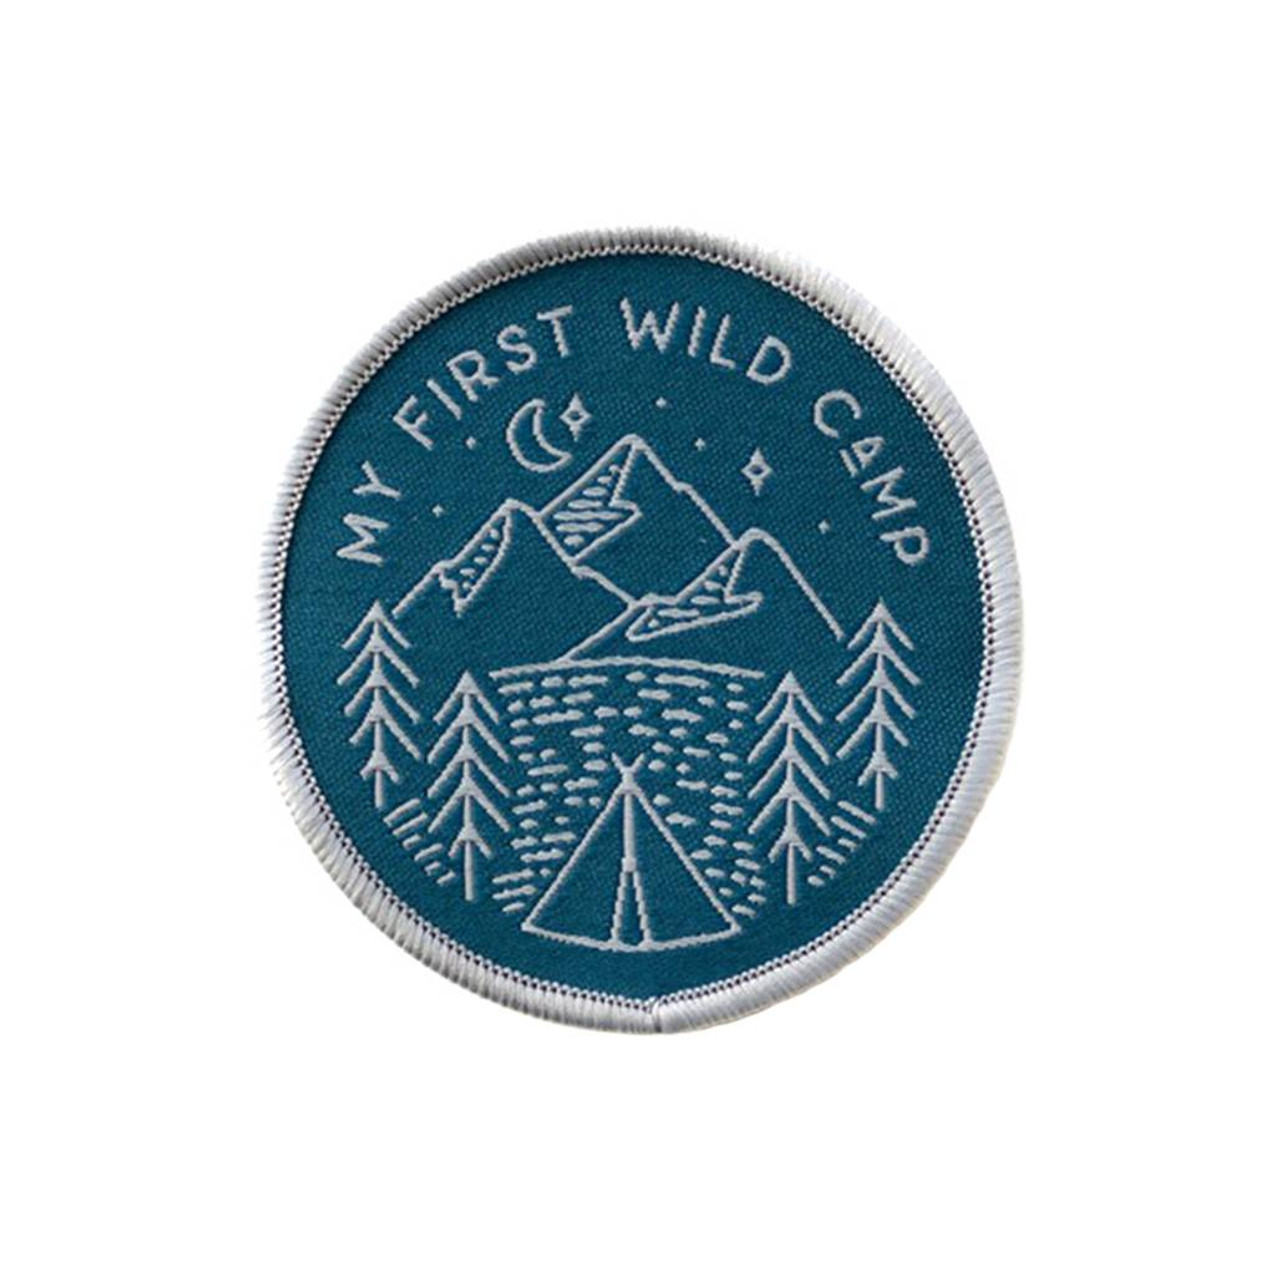 My First Wild Camp Patch